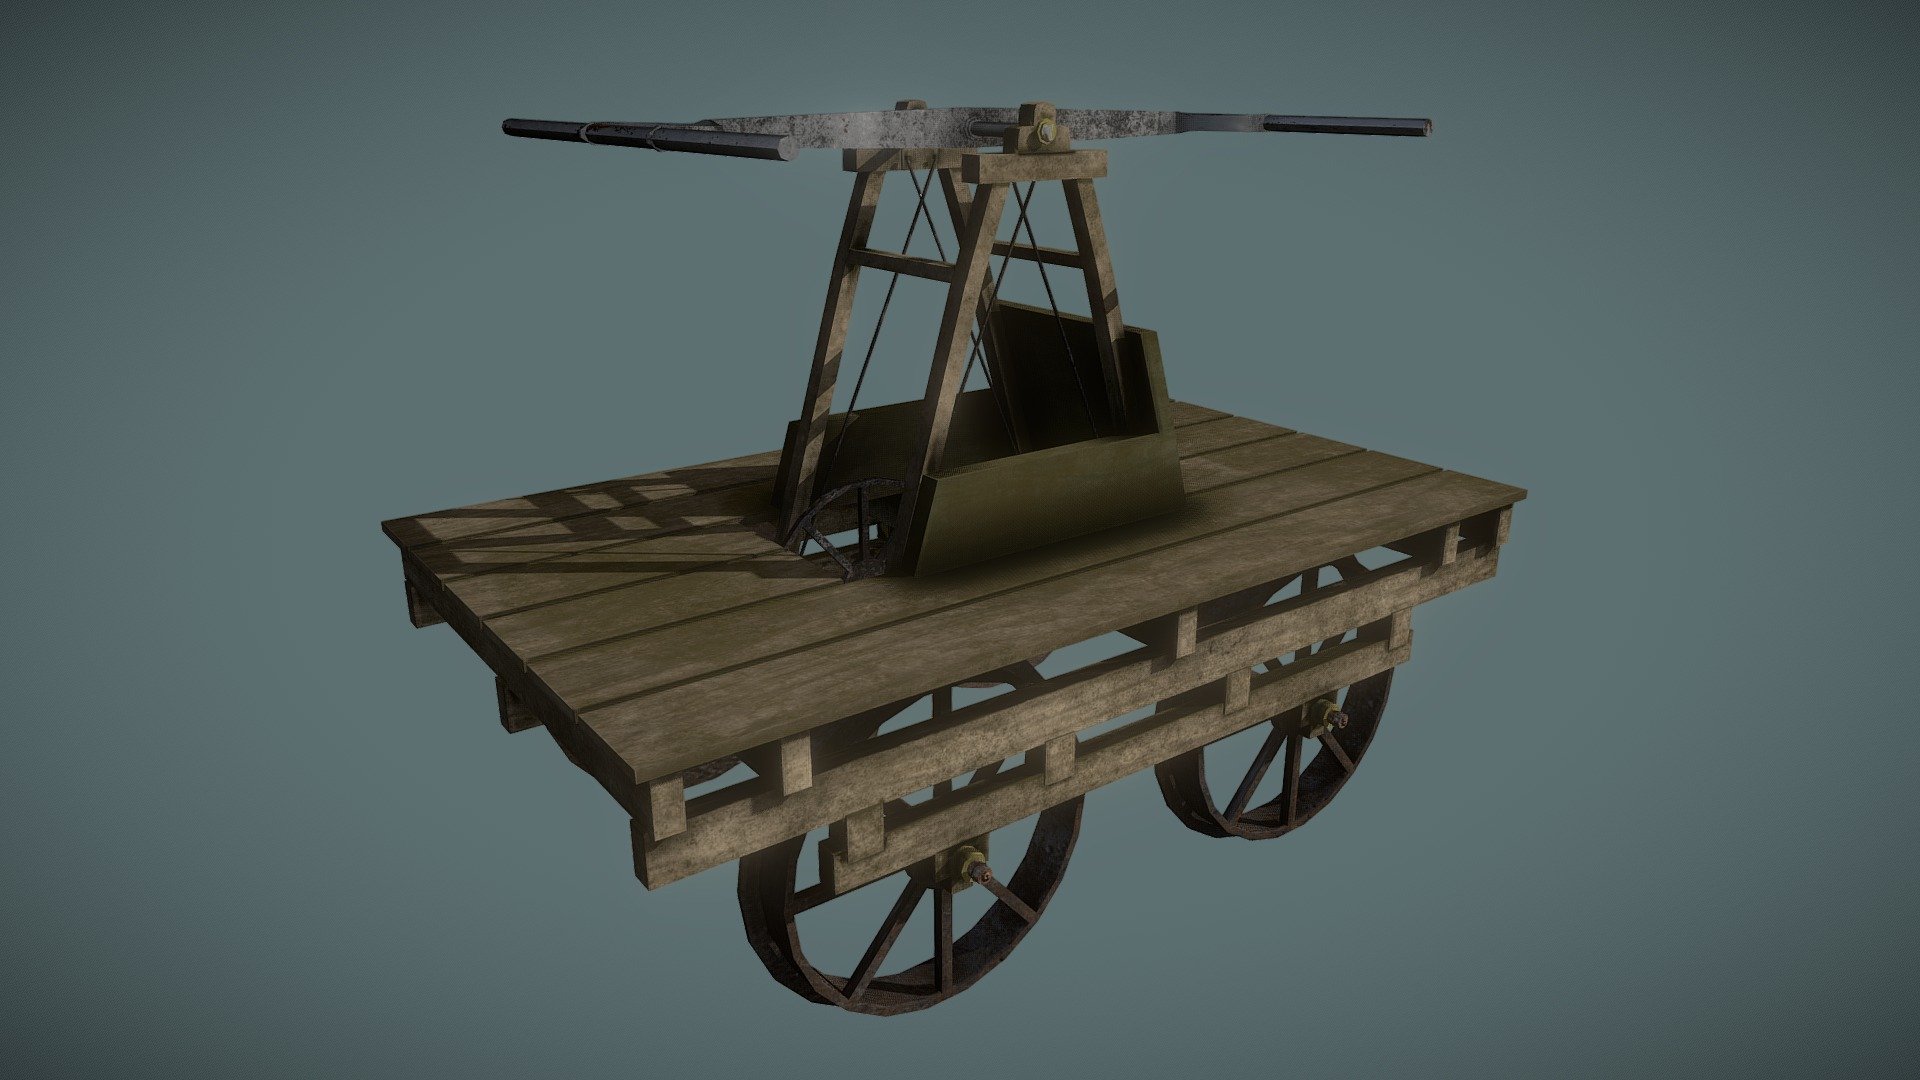 Game ready PBR Handcar model for train environments. Based on 1860's American railyards, more assets coming soon in a similar style 3d model